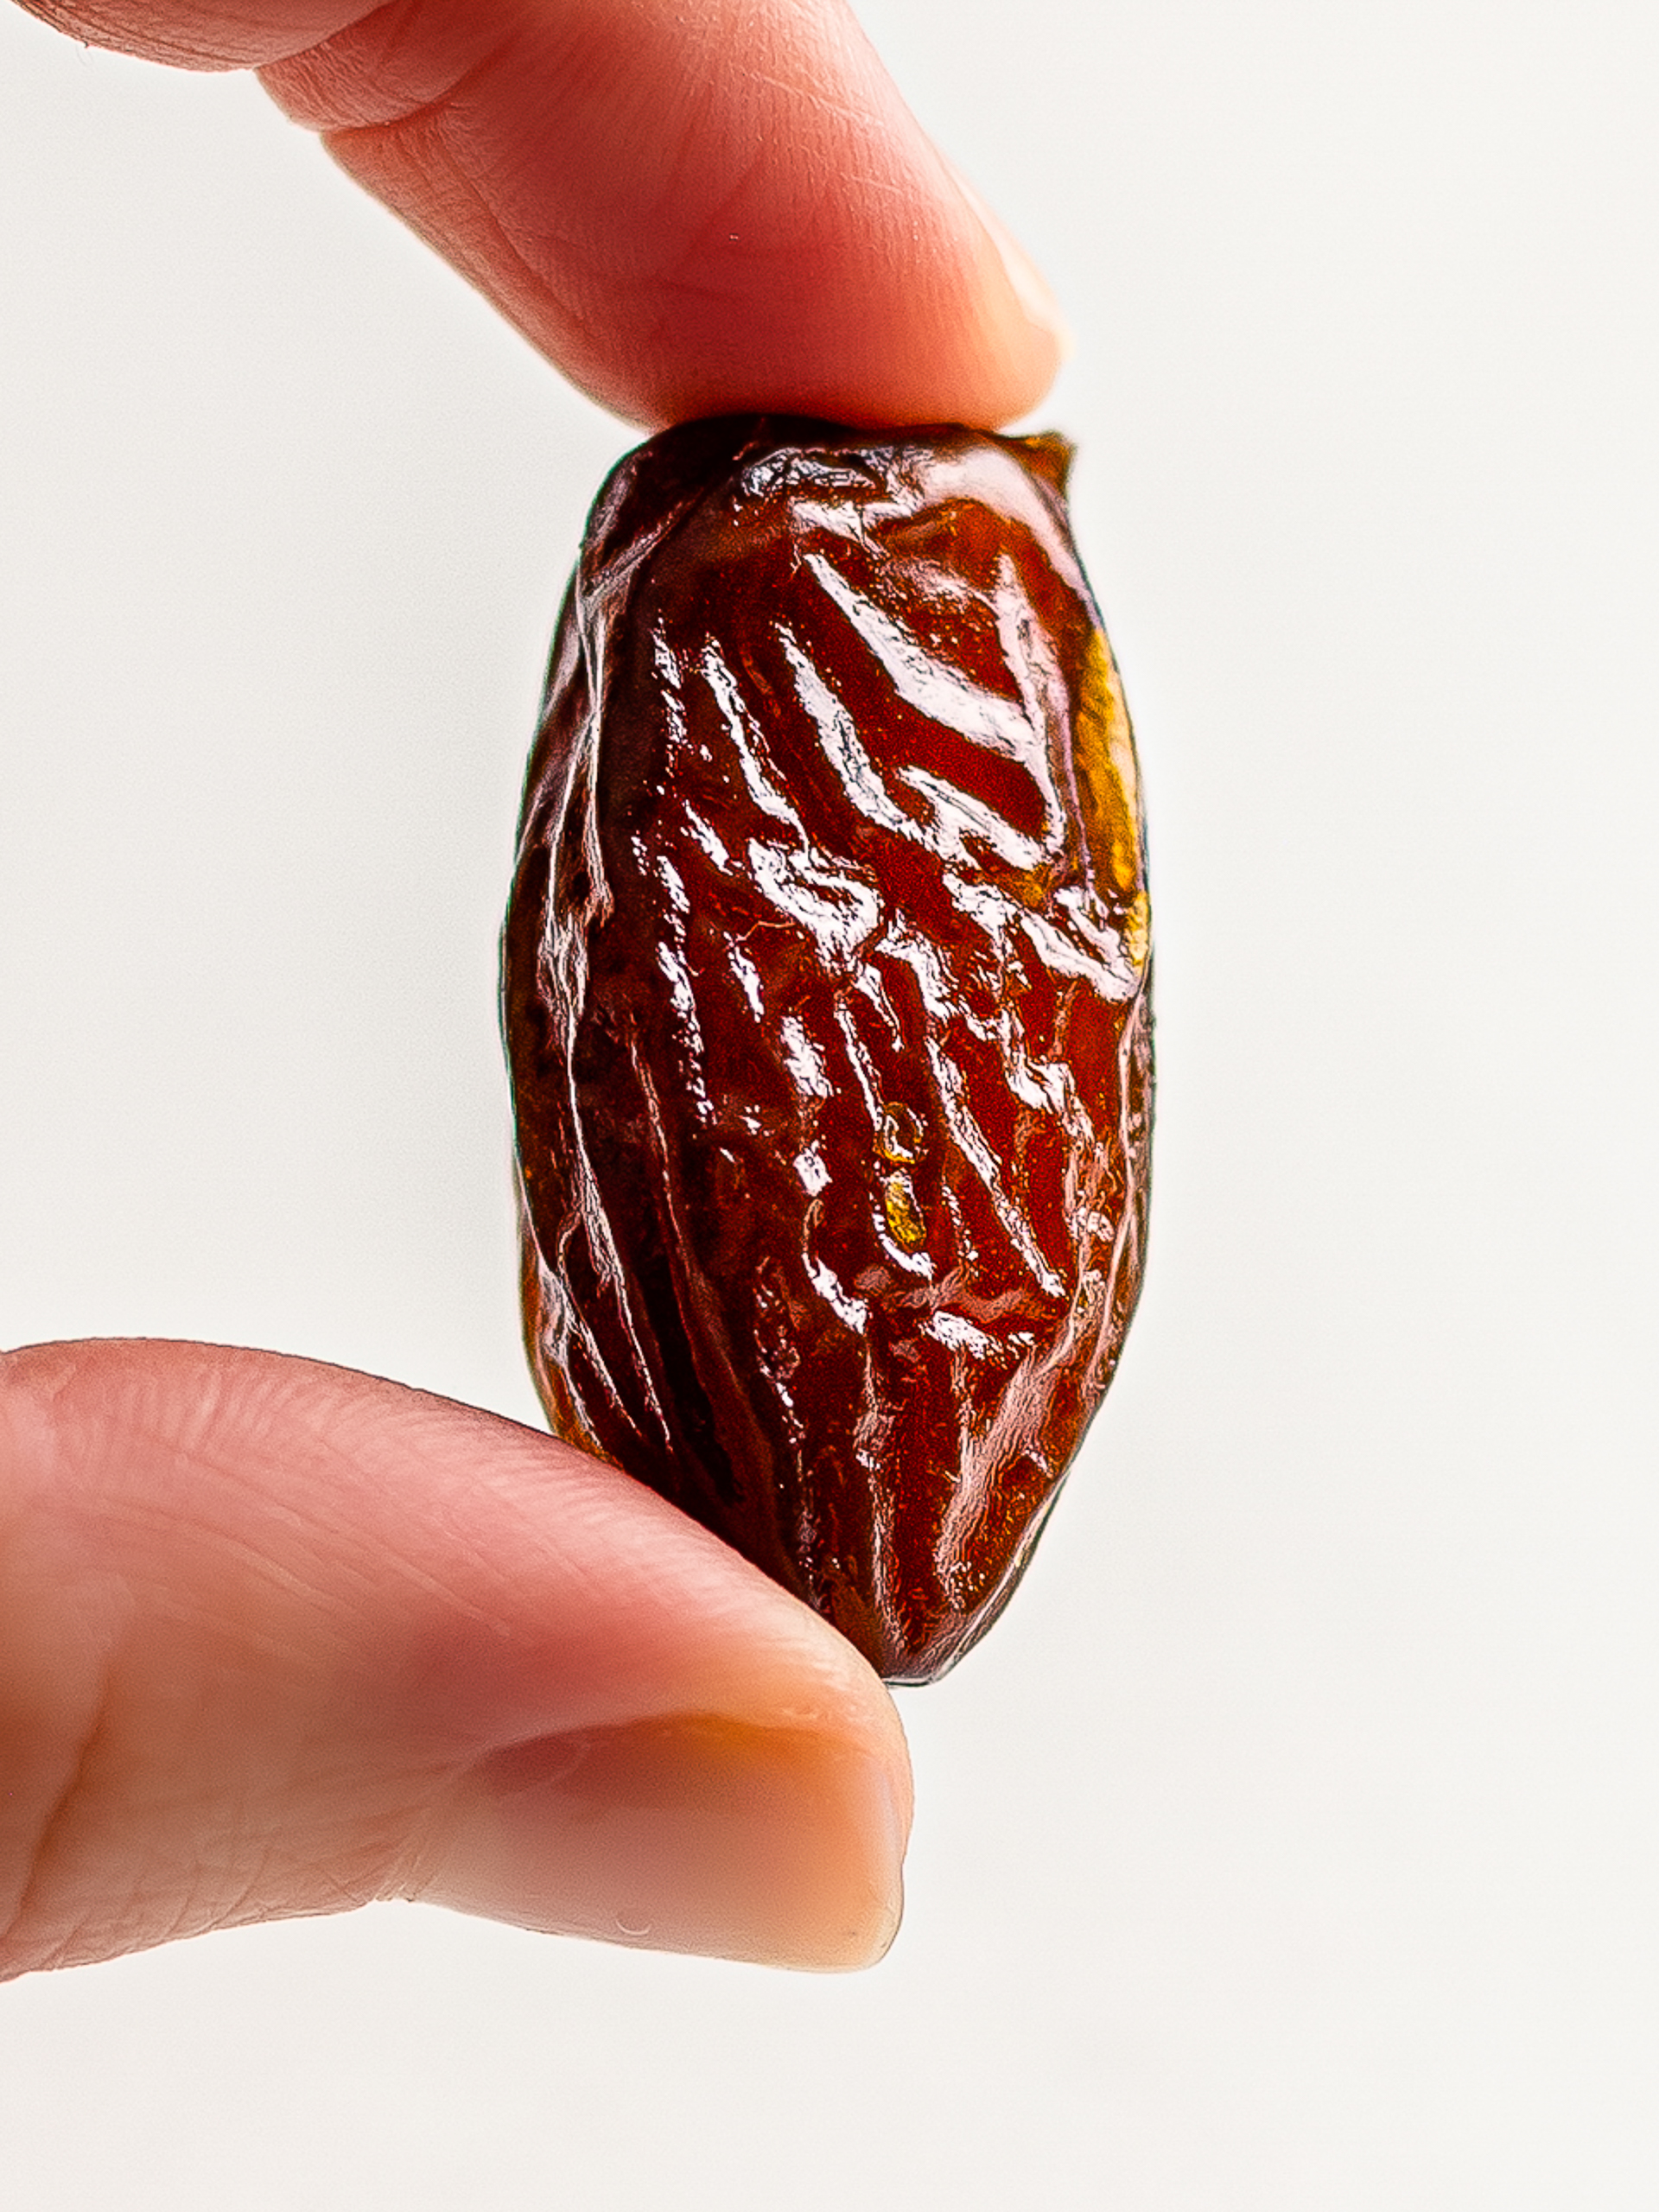 Why Dates Are So Much Better Than Sugar